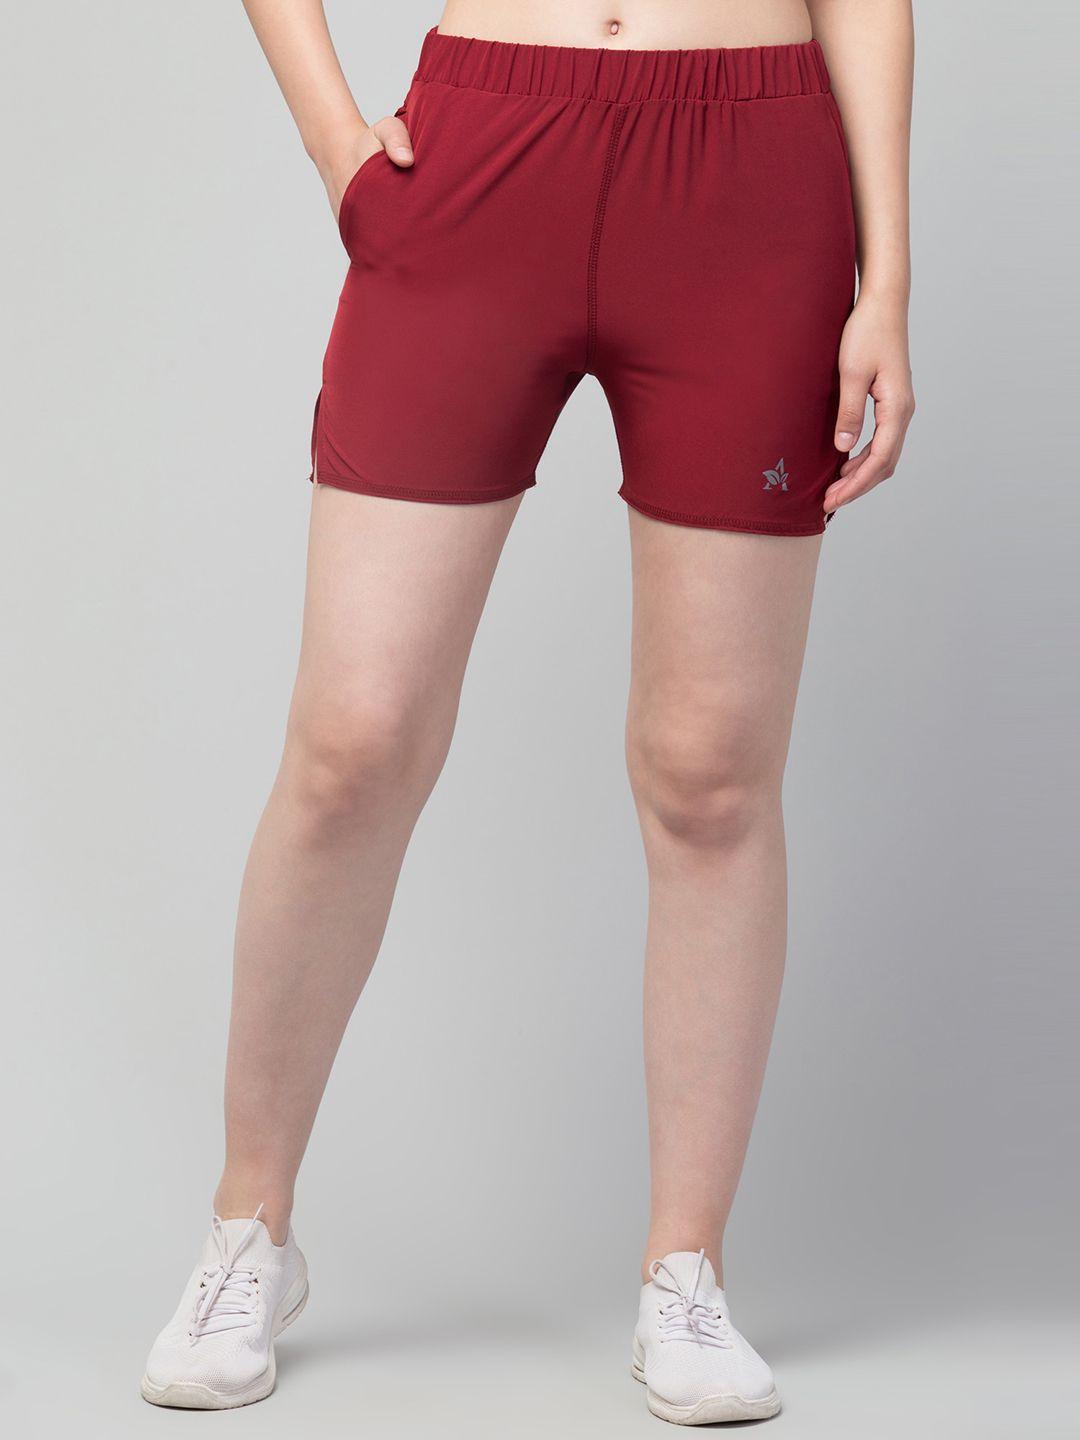 apraa & parma women outdoor sports shorts with e-dry technology